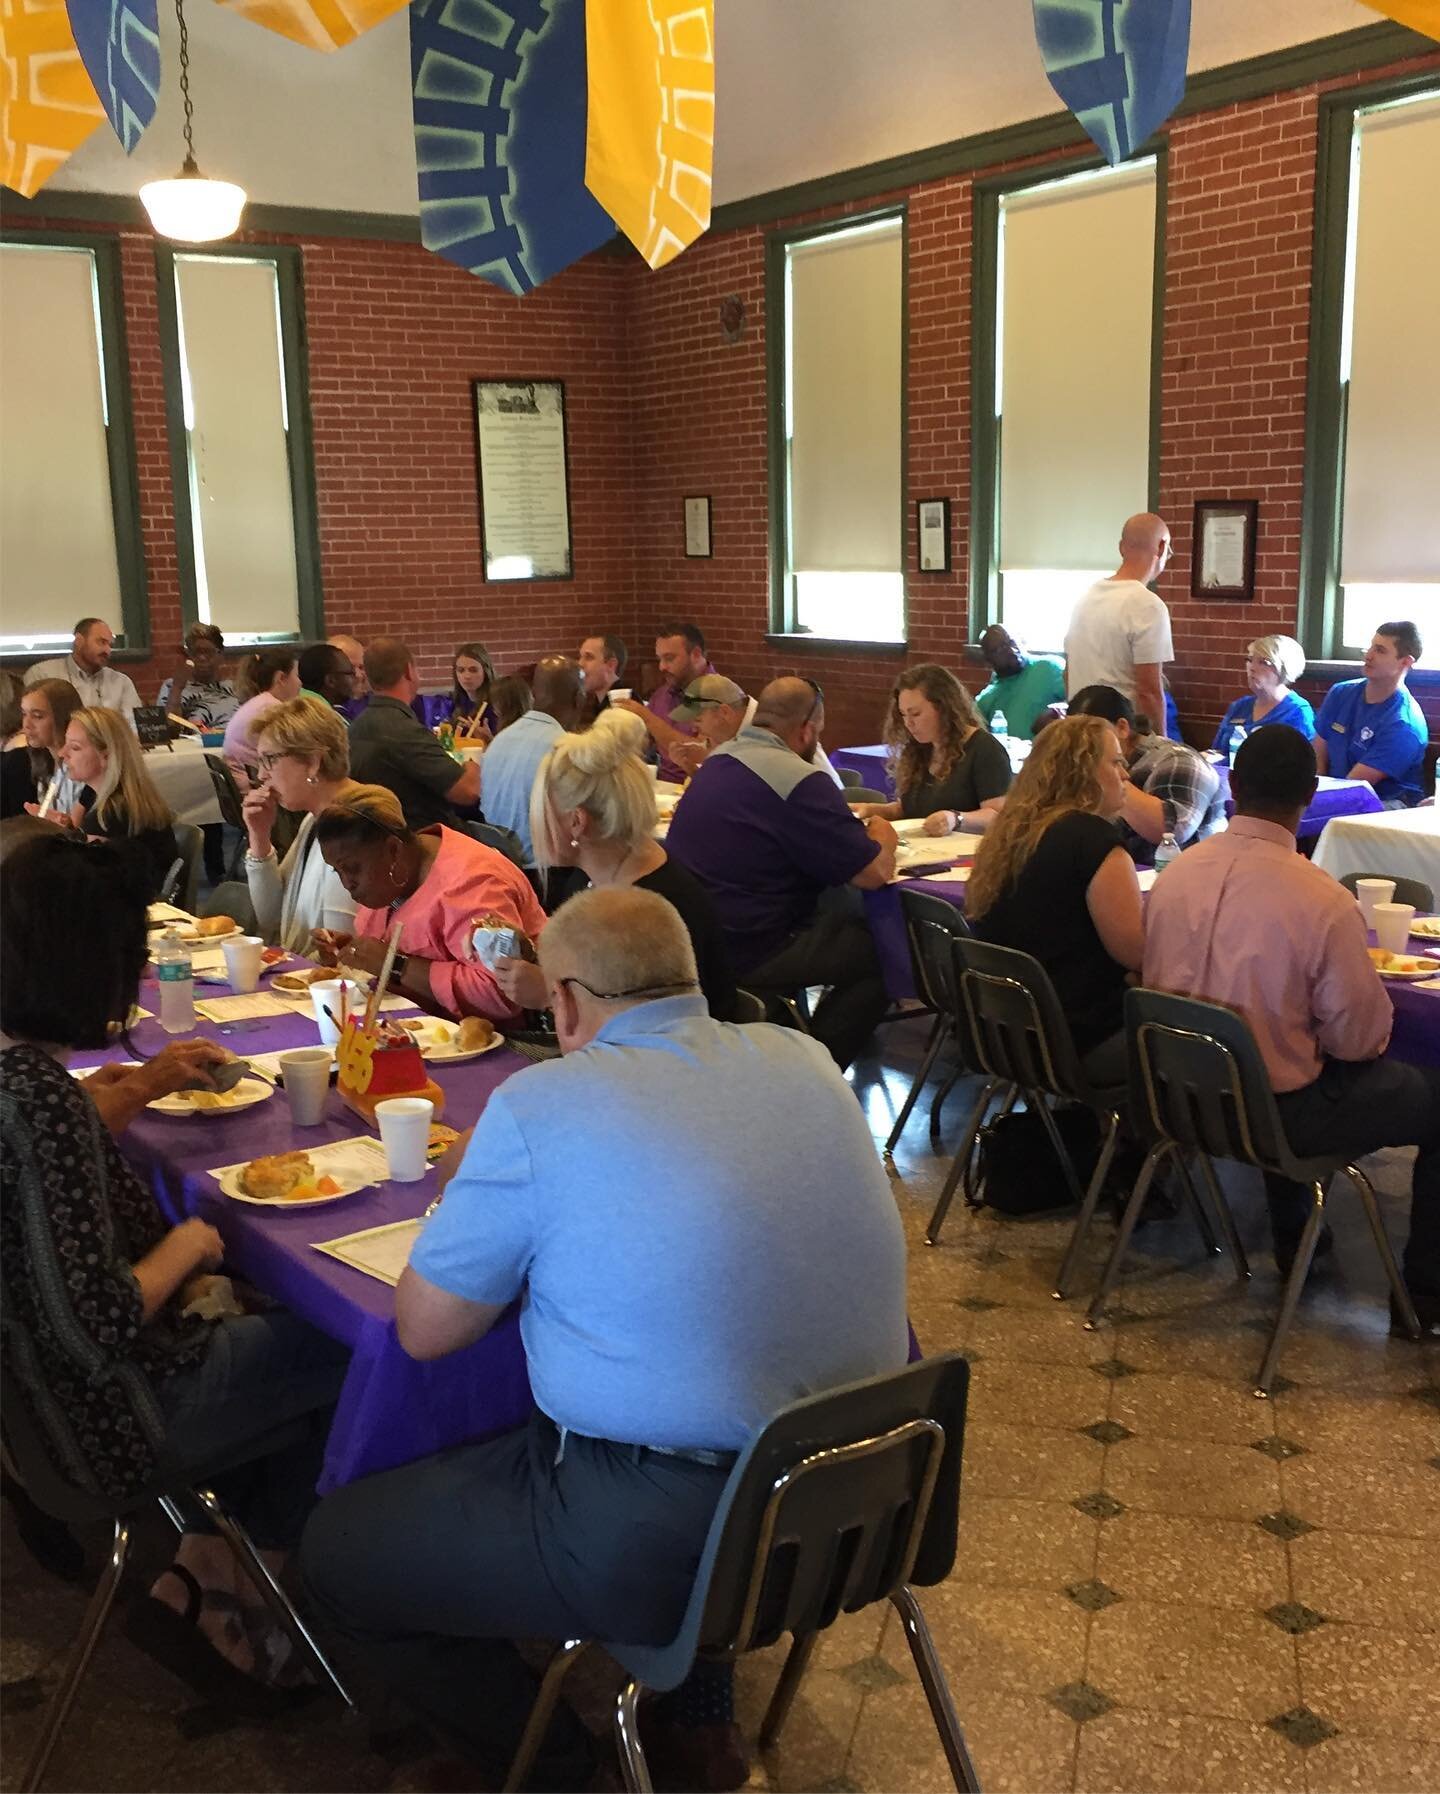 THIS is what a room full of OPTIMISM, ENTHUSIASM, and ENERGY looks like!  Last week, your Lonoke Chamber was honored to continue our tradition of feeding our new Lonoke School District teachers and administration.  It was exciting to hear the vision 